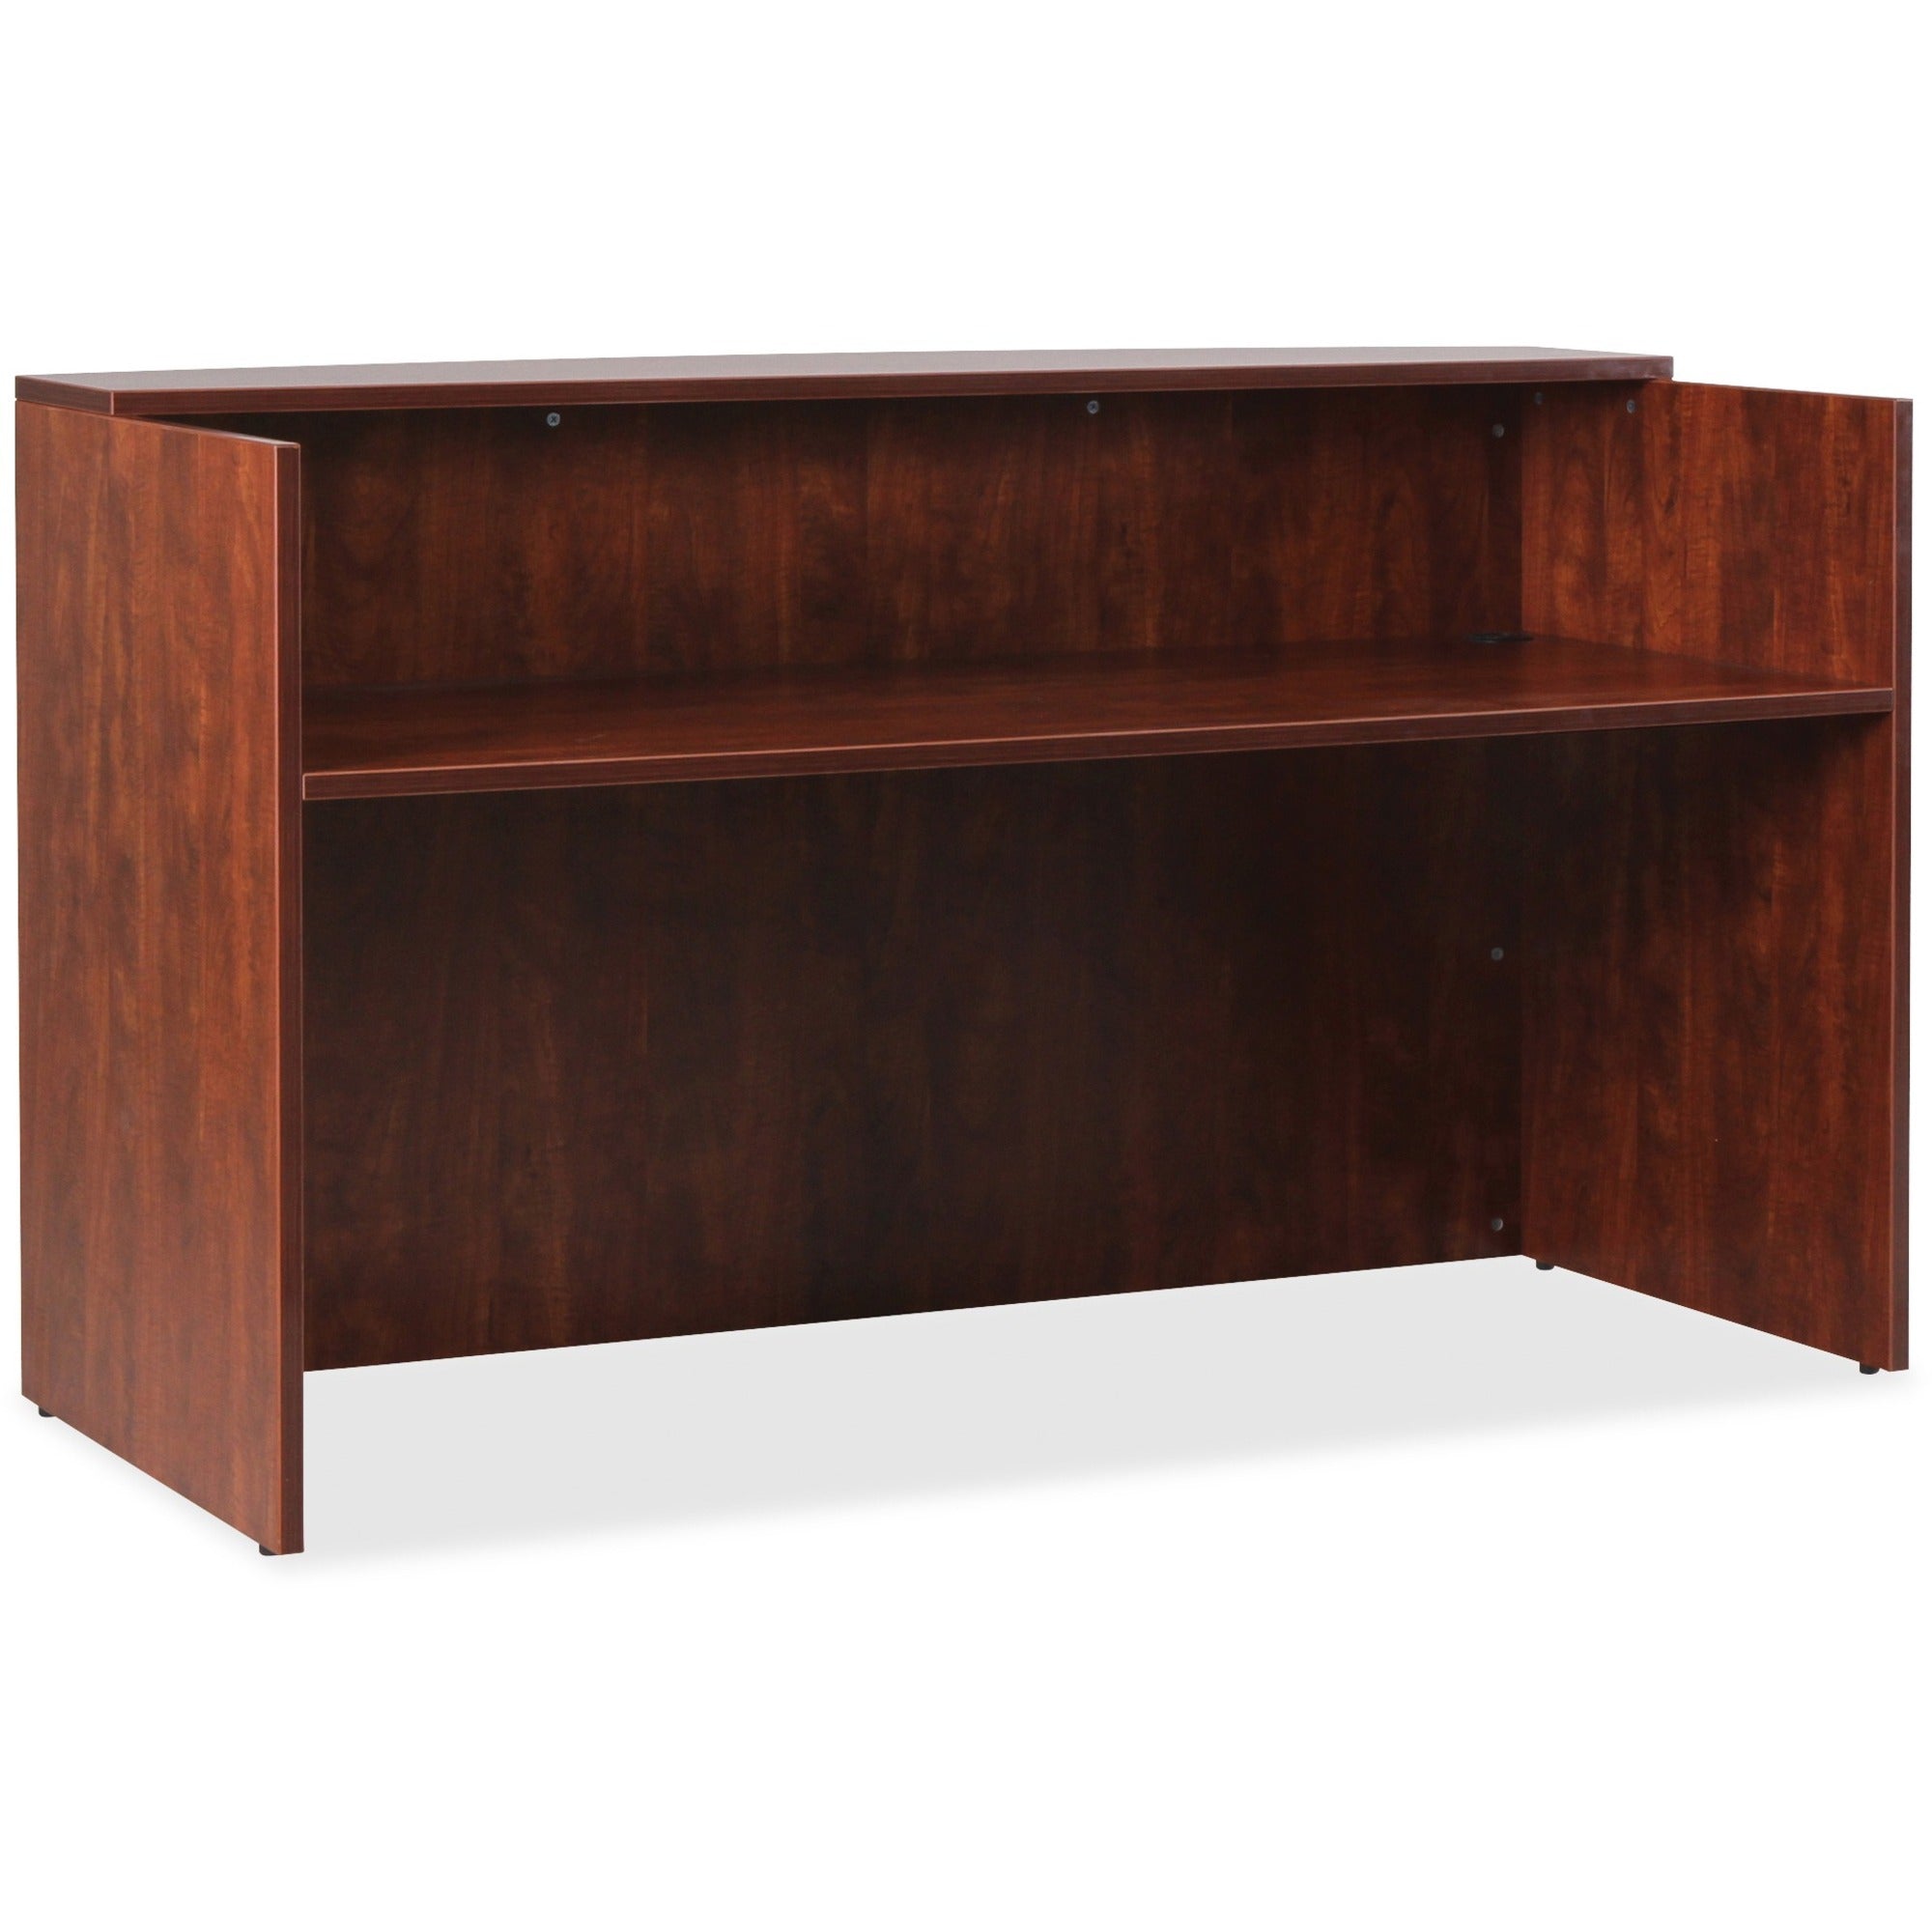 Lorell Essentials Series Front Reception Desk - 1" Top, 35.4" x 70.9"42.5" Desk - Finish: Cherry Laminate - Durable - For Office - 